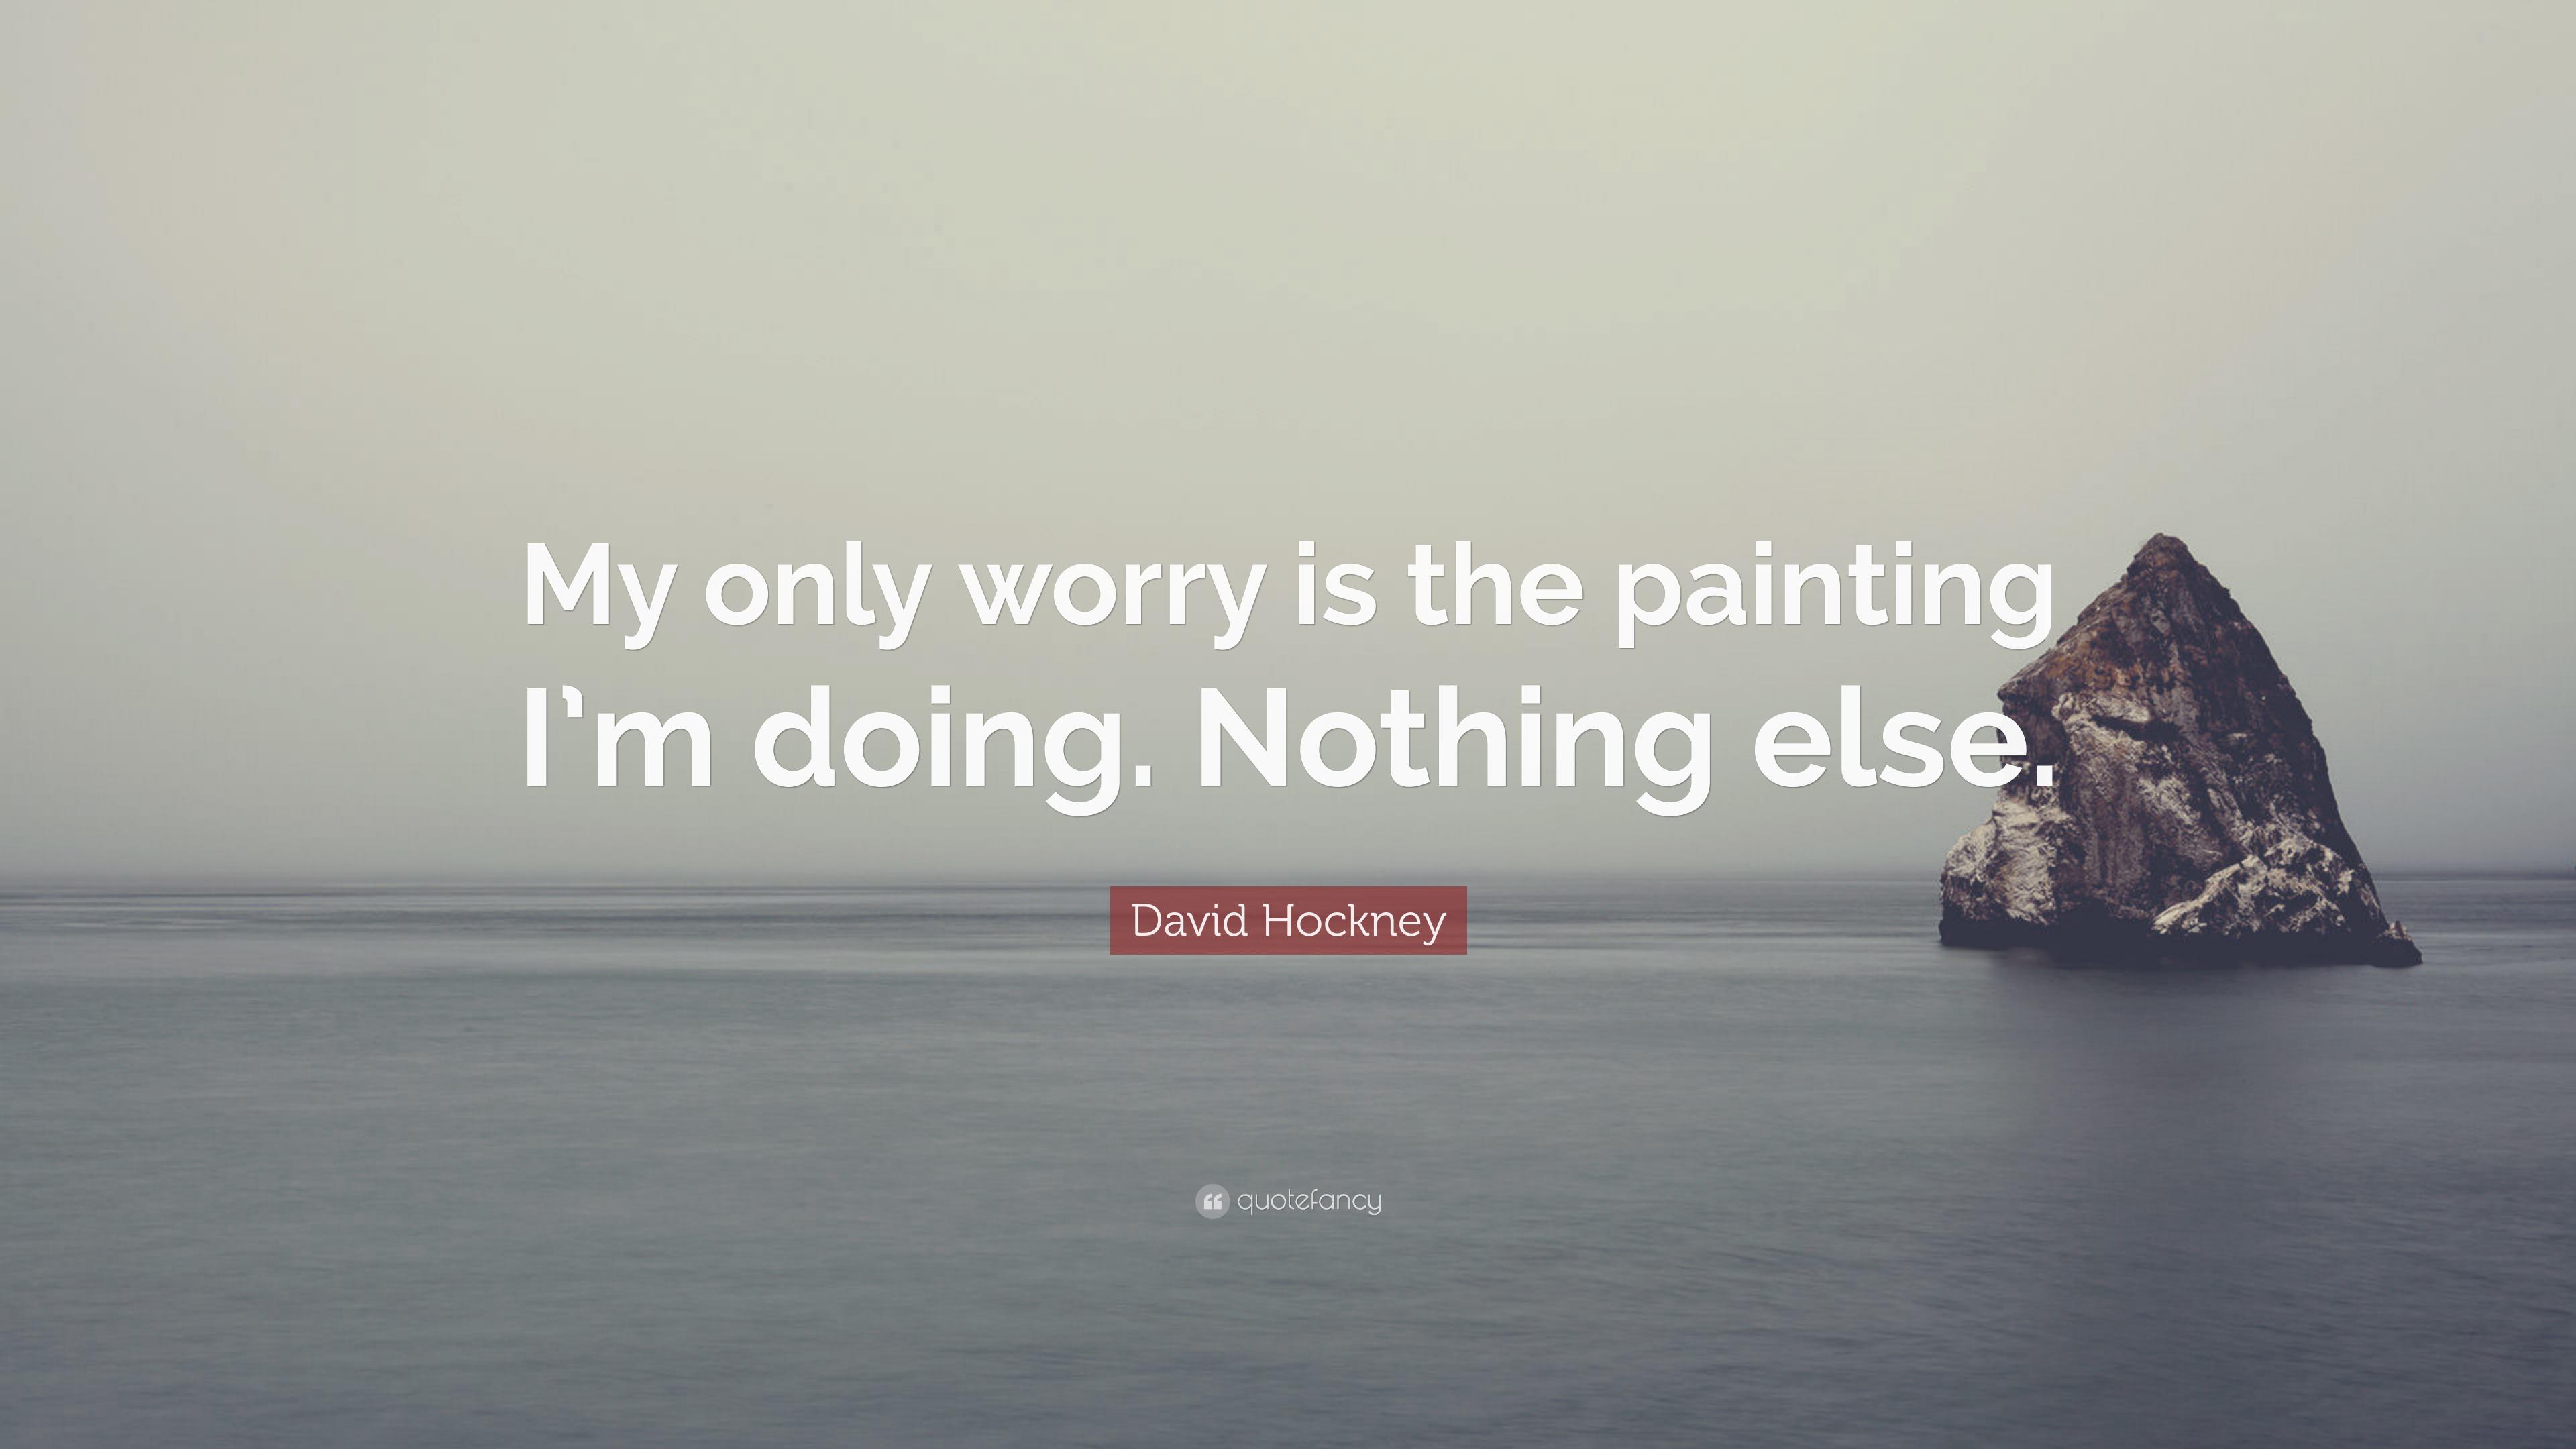 David Hockney Quote: “My only worry is the painting I'm doing